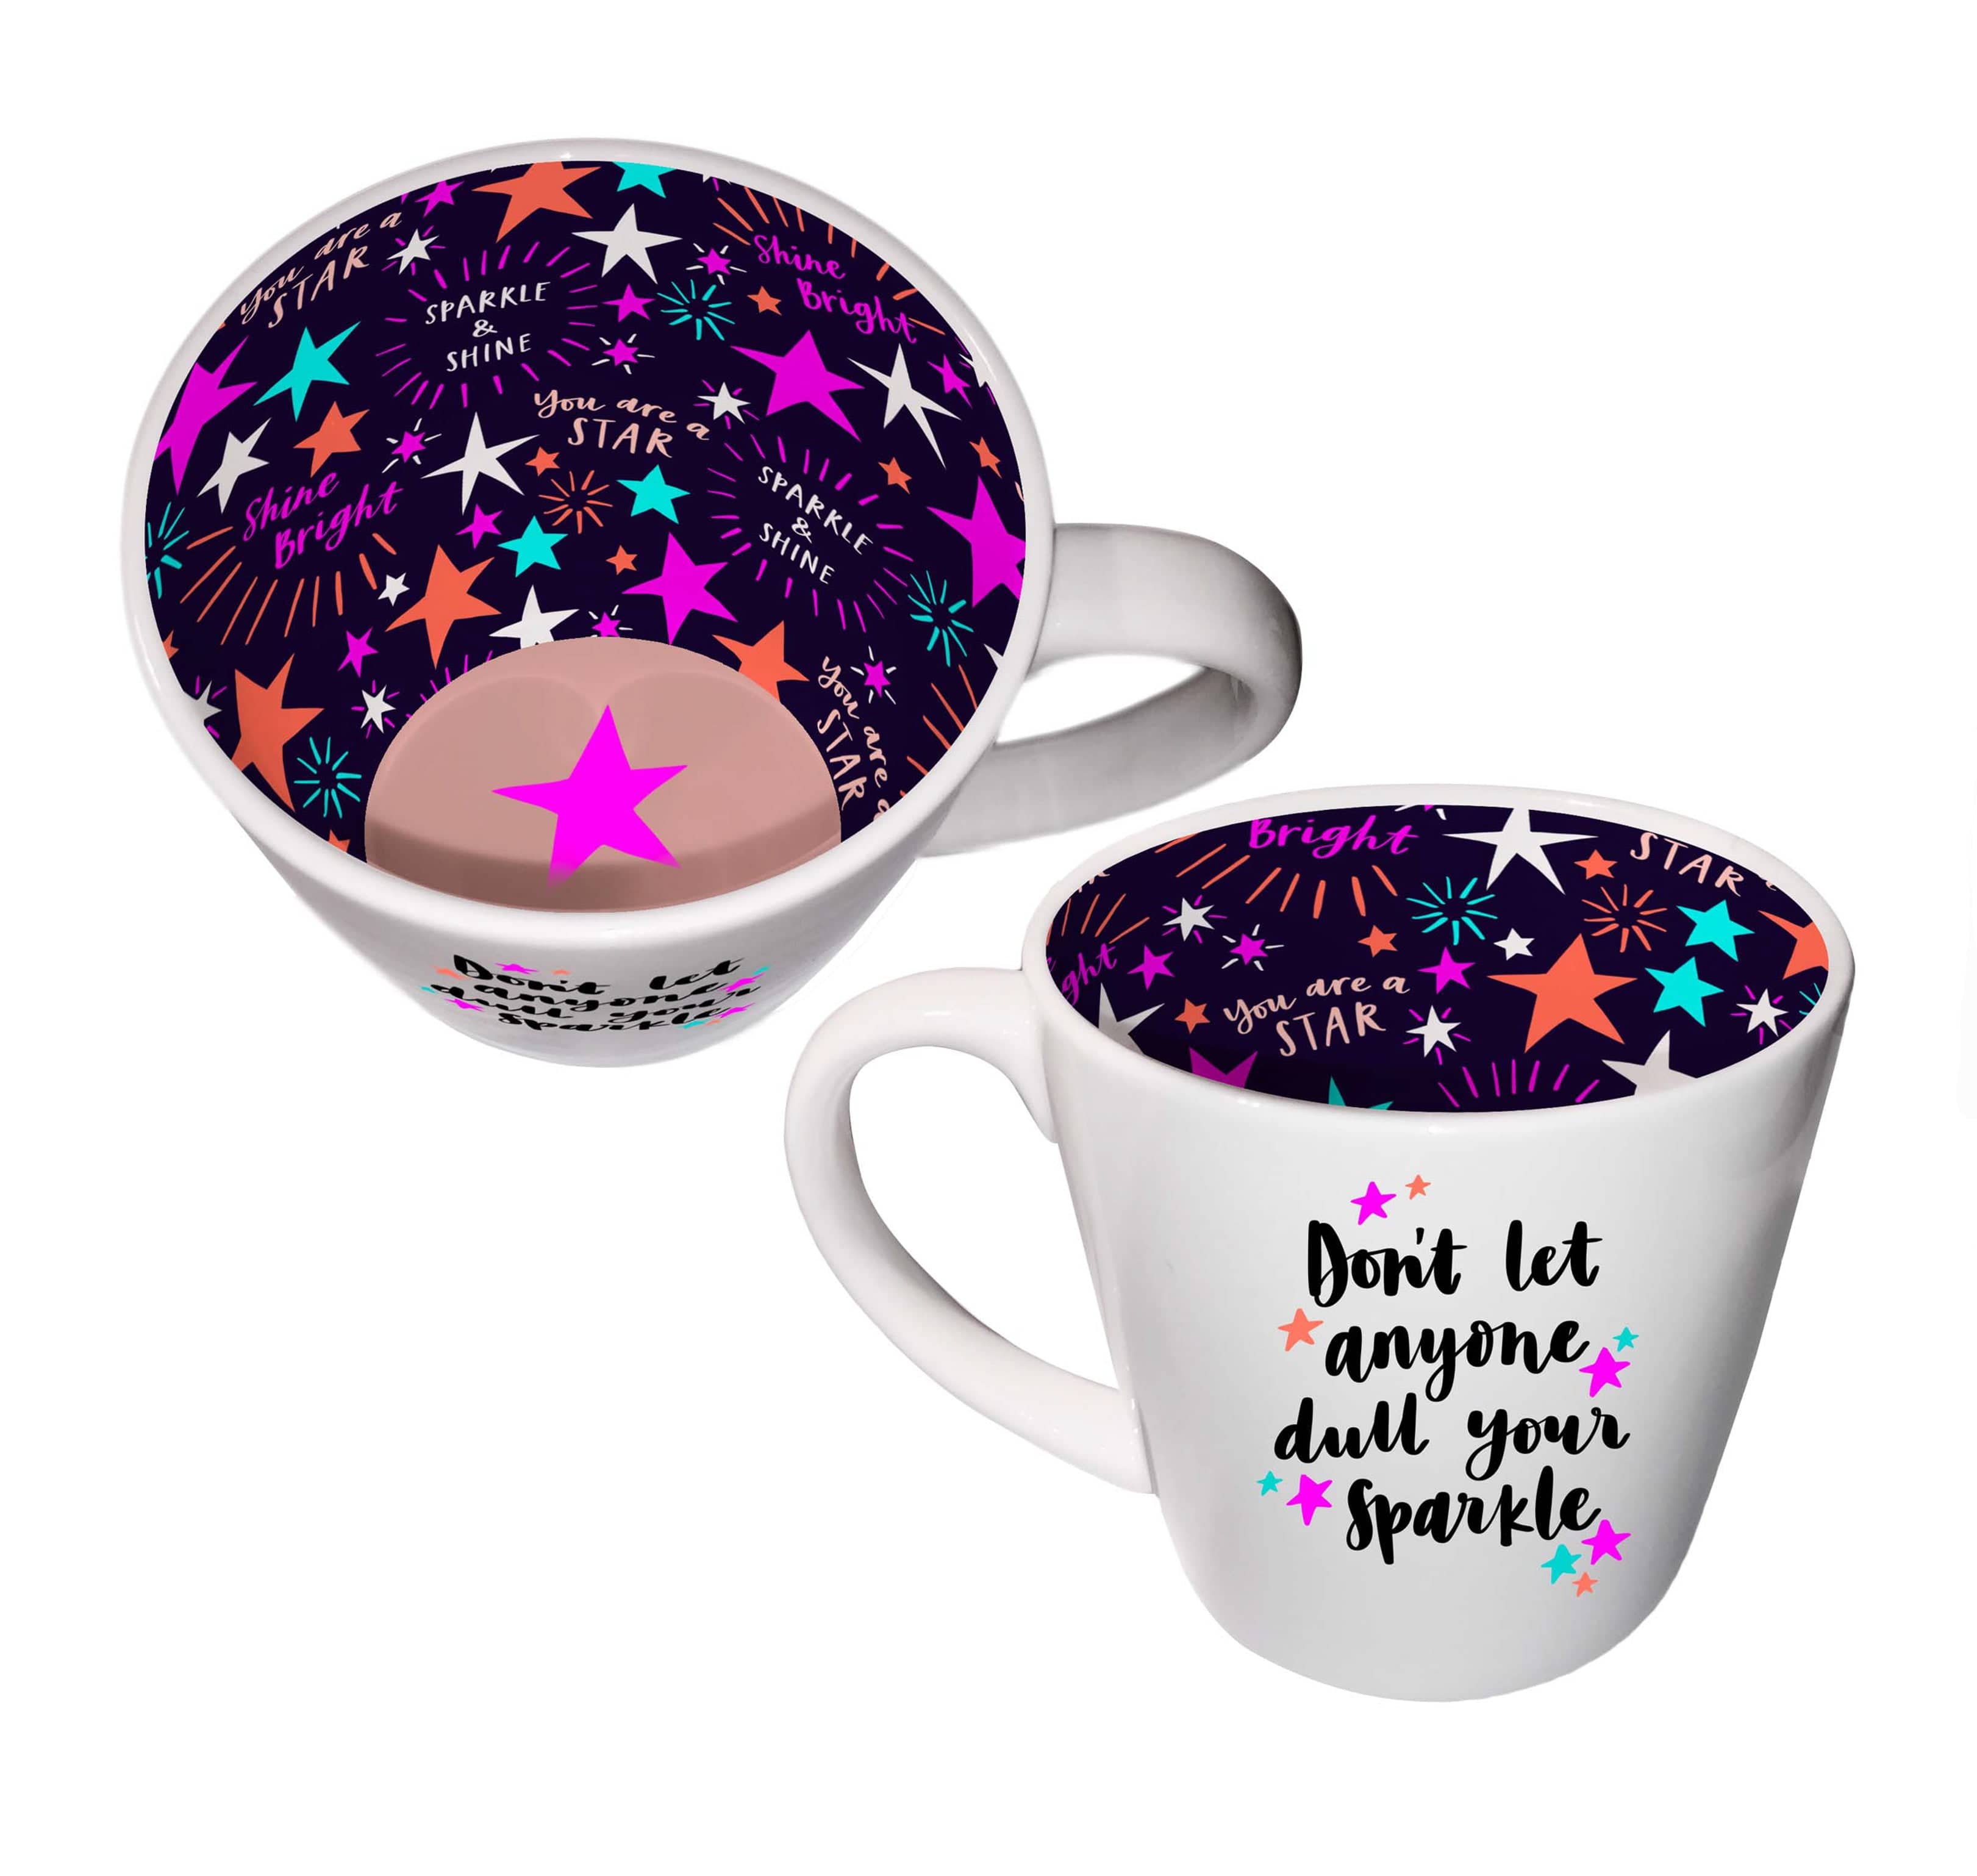 WPL Gifts Mug Inside Out Mug With Gift Box - Don't let anyone dull your sparkle